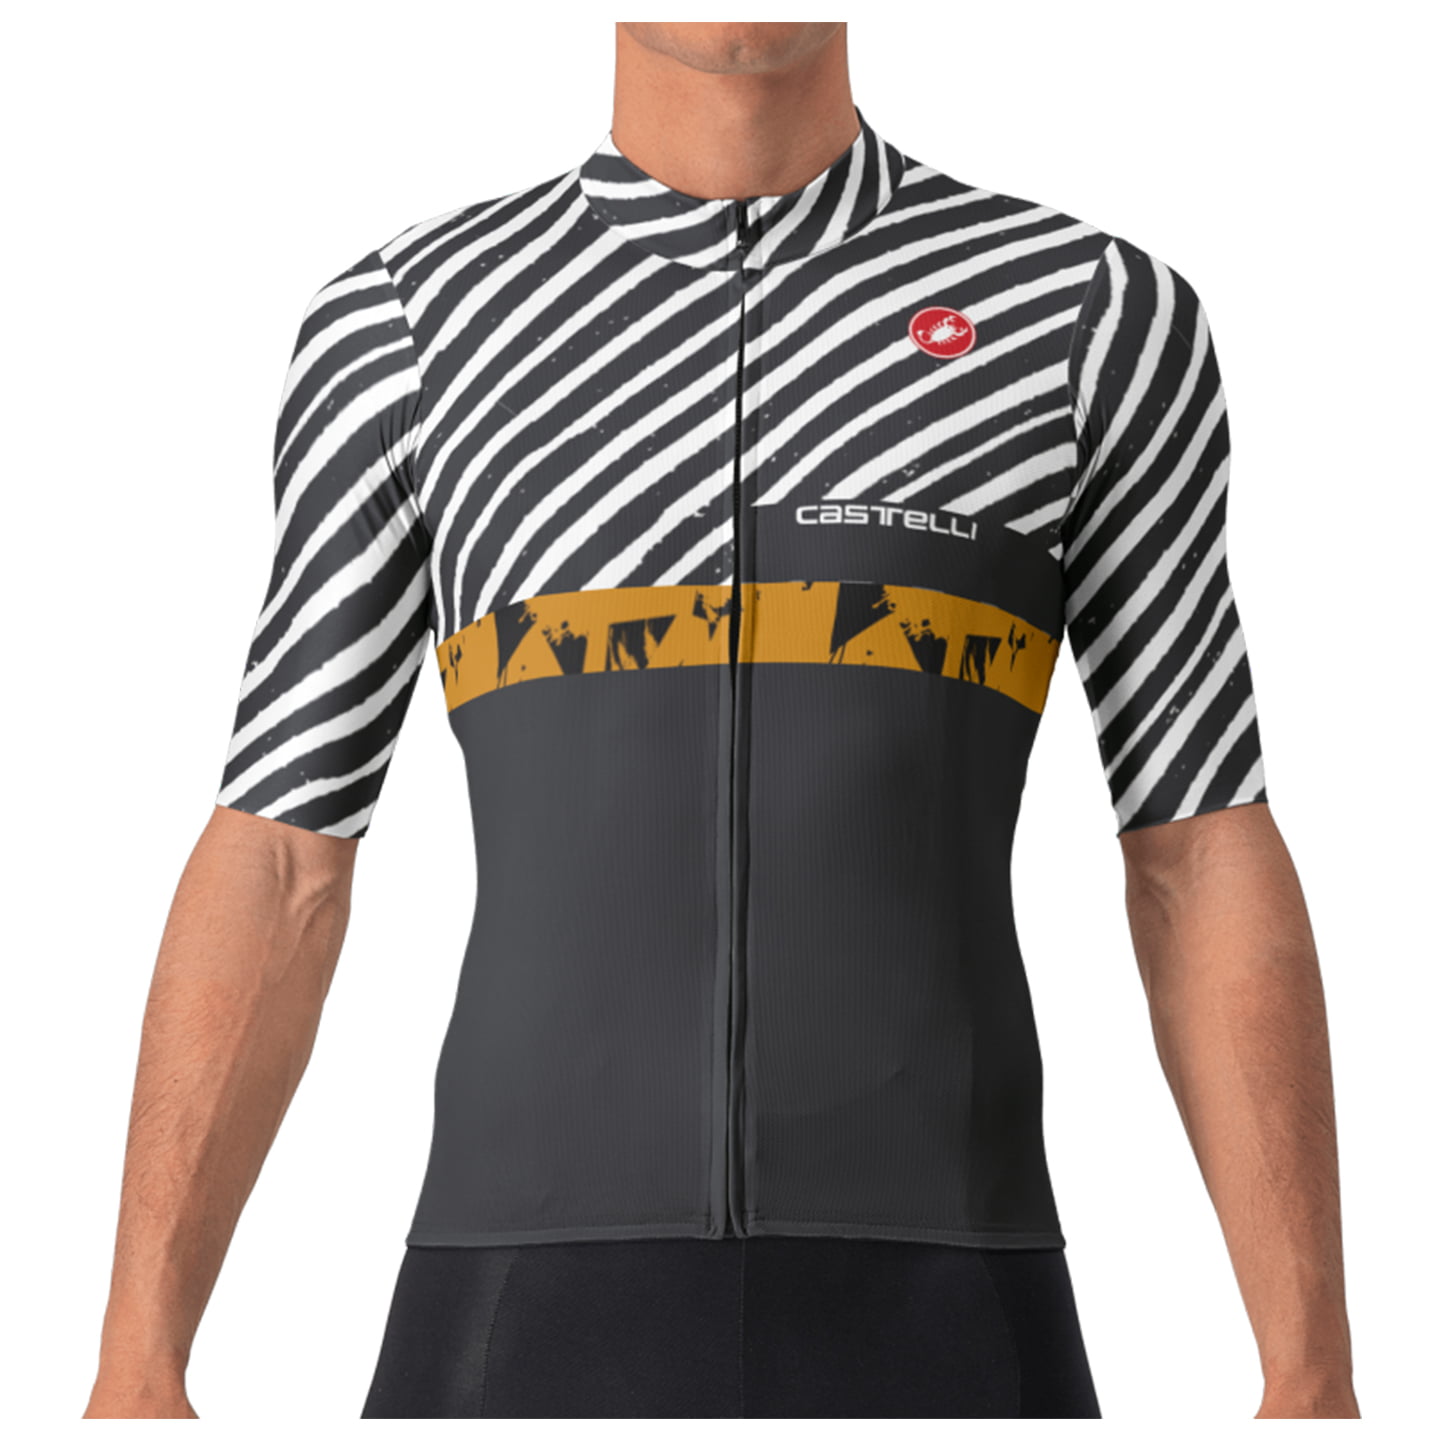 CASTELLI Diagon Short Sleeve Jersey, for men, size XL, Cycling jersey, Cycle clothing